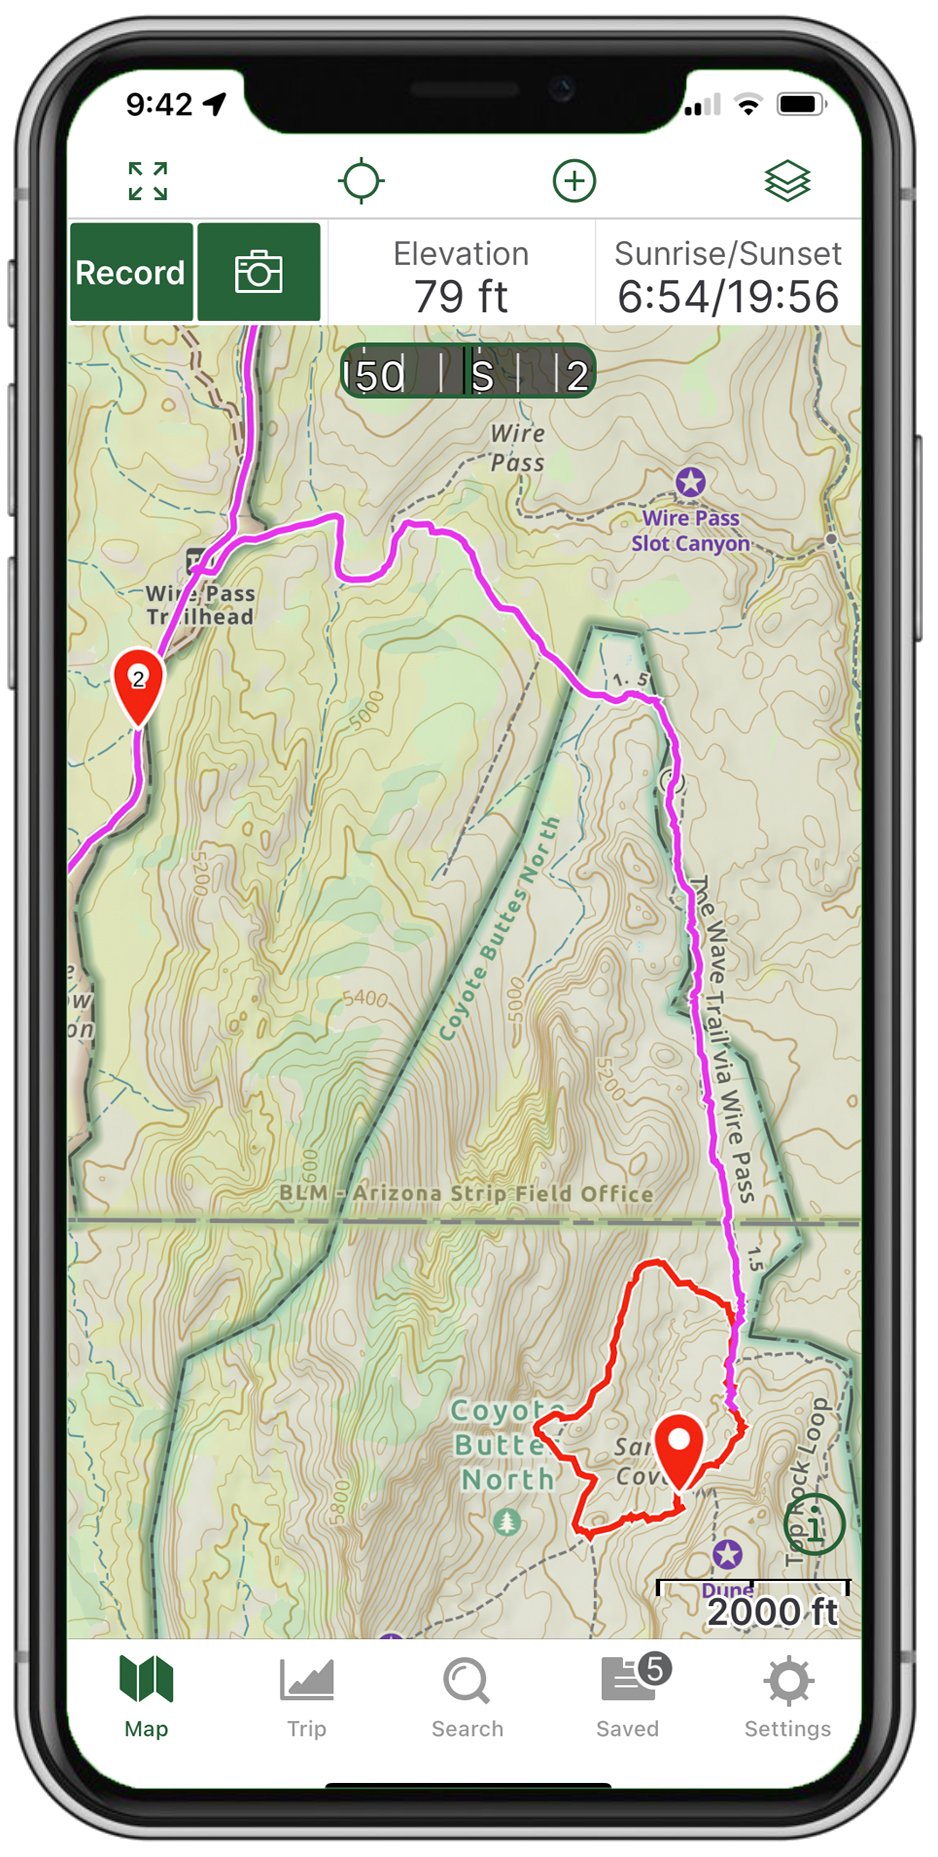 Ability to import GPS and tracks